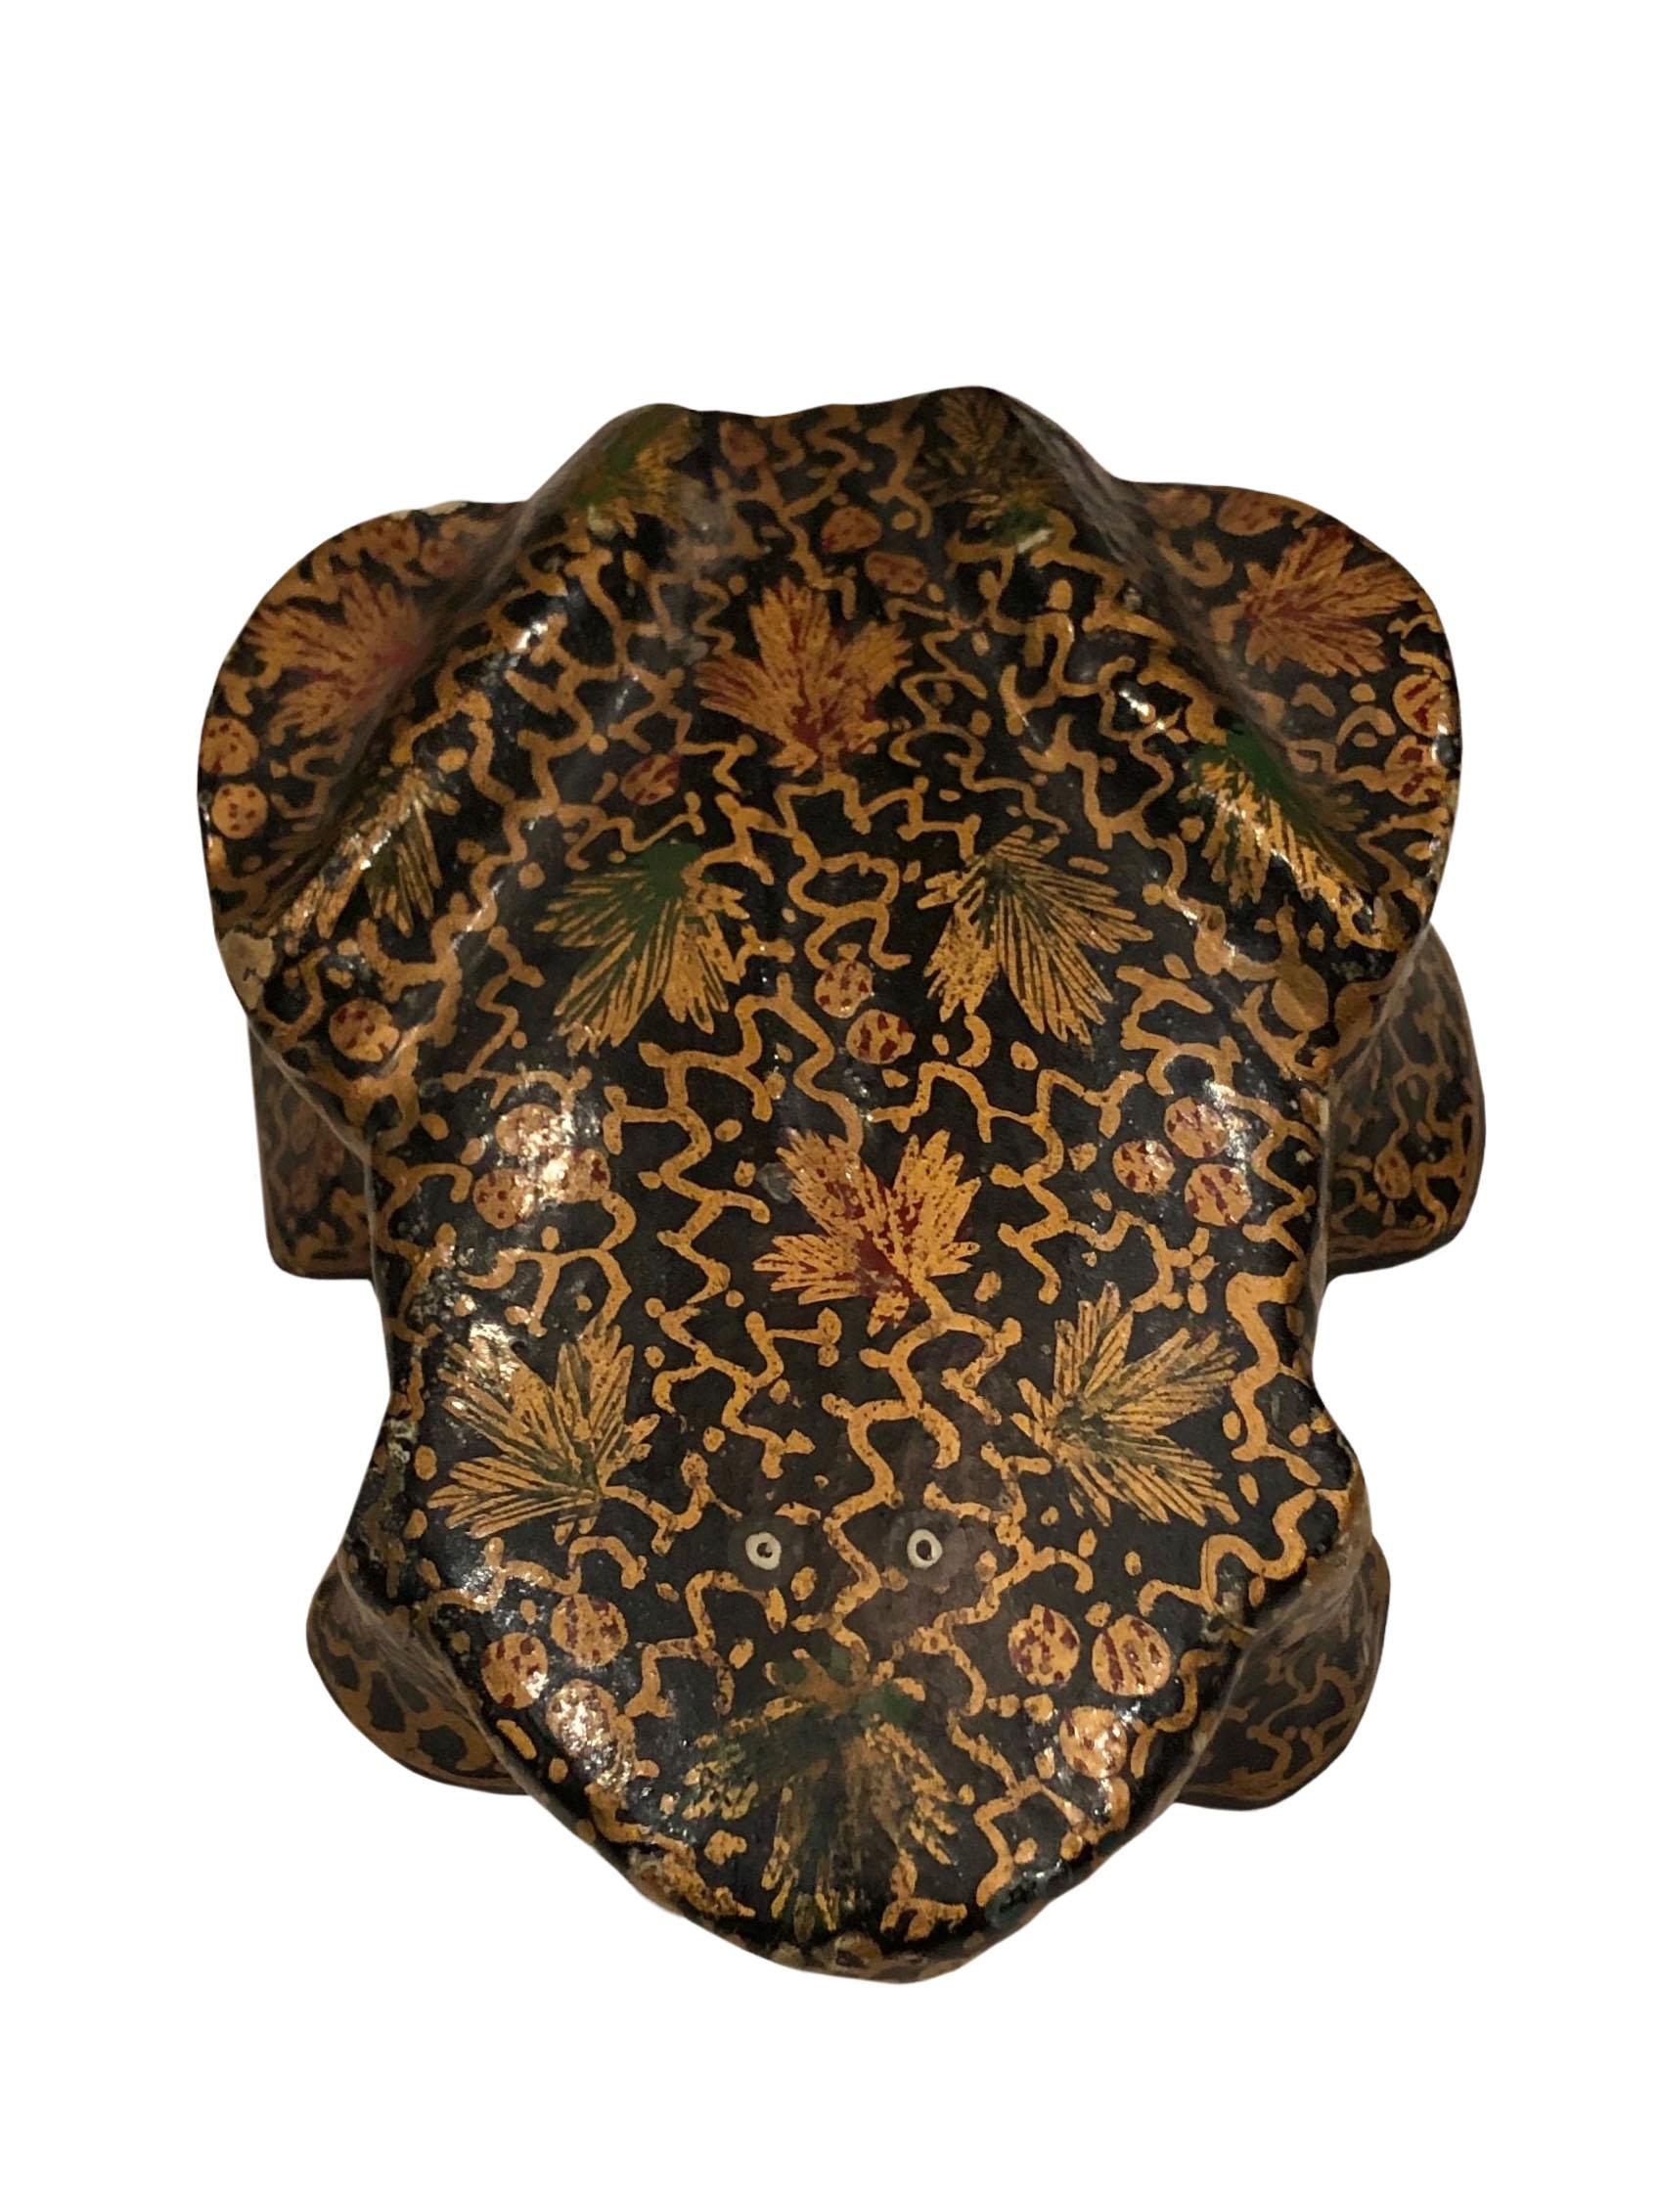 A vintage hand painted papier mâché box in the shape of a frog from Kashmir India. Gold and black, circa,1960s.